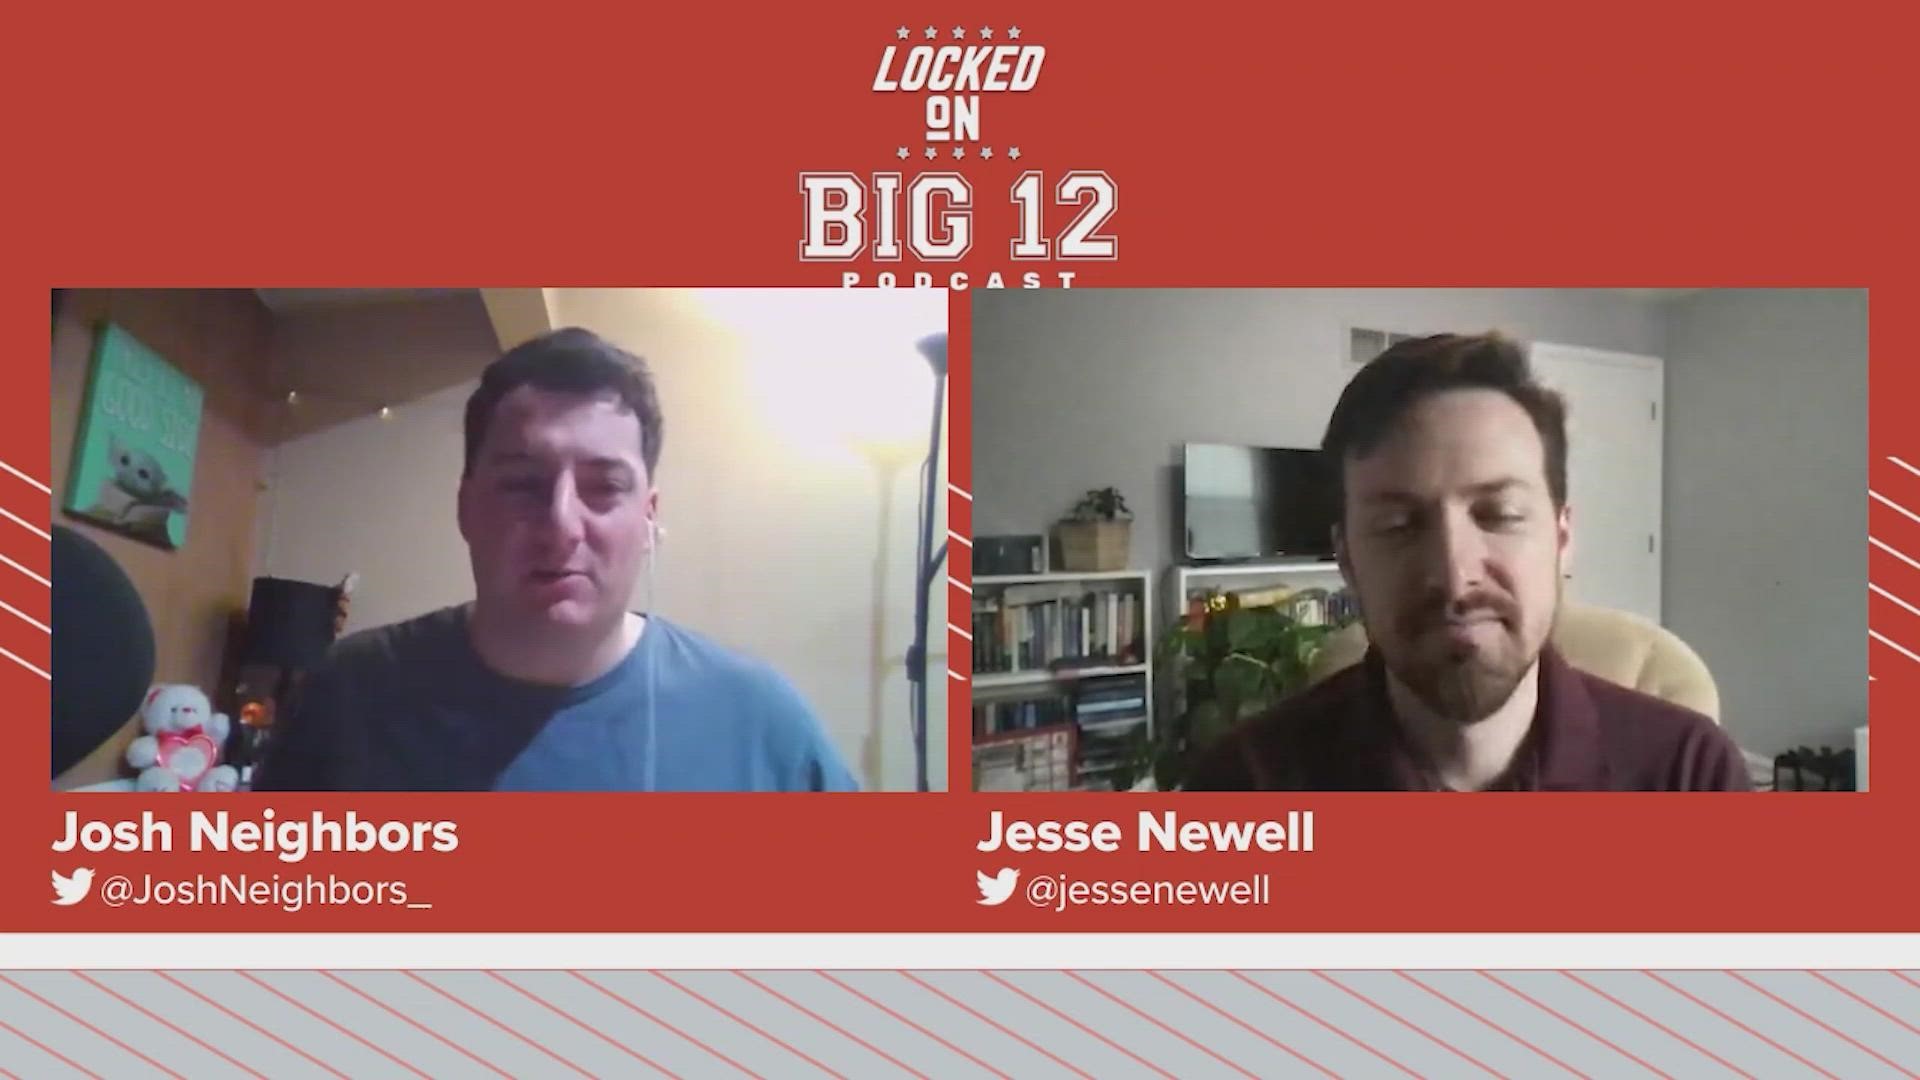 Jesse Newell of the Kansas City Star joins Josh Neighbors to discuss the loaded Big 12 basketball conference on the Locked On Big 12 podcast.